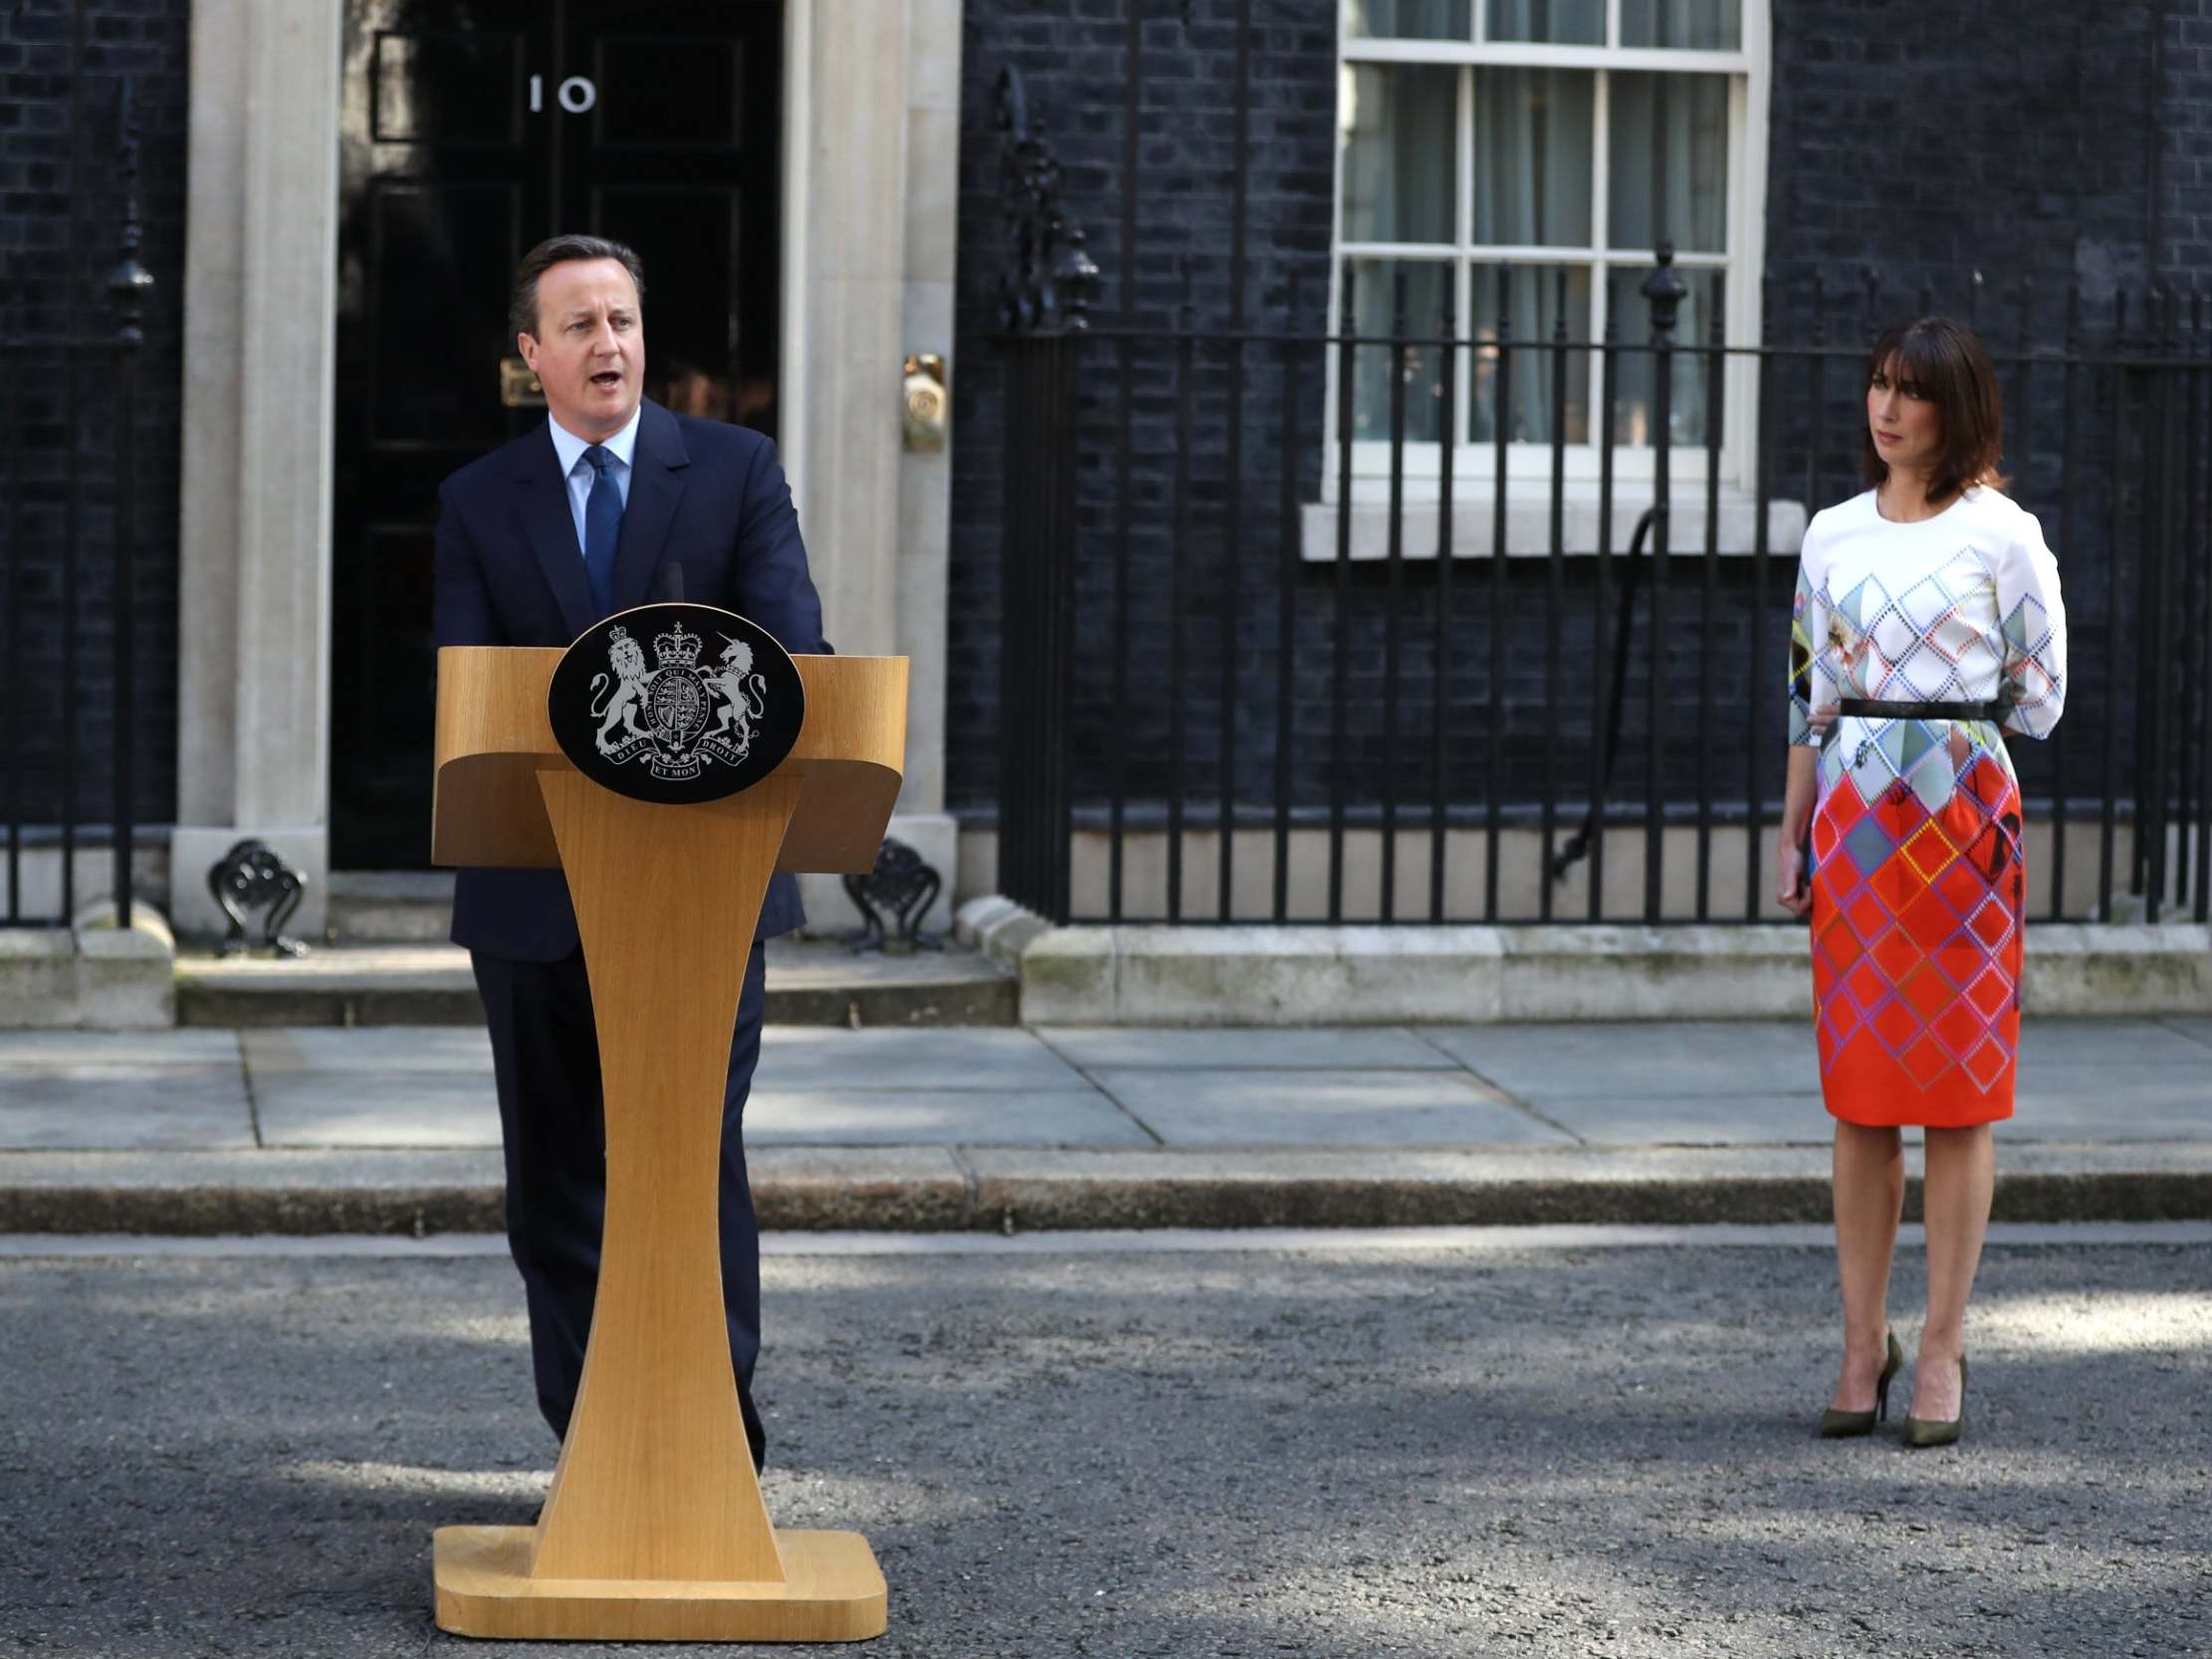 Cameron resigns on the steps of 10 Downing Street in 2016